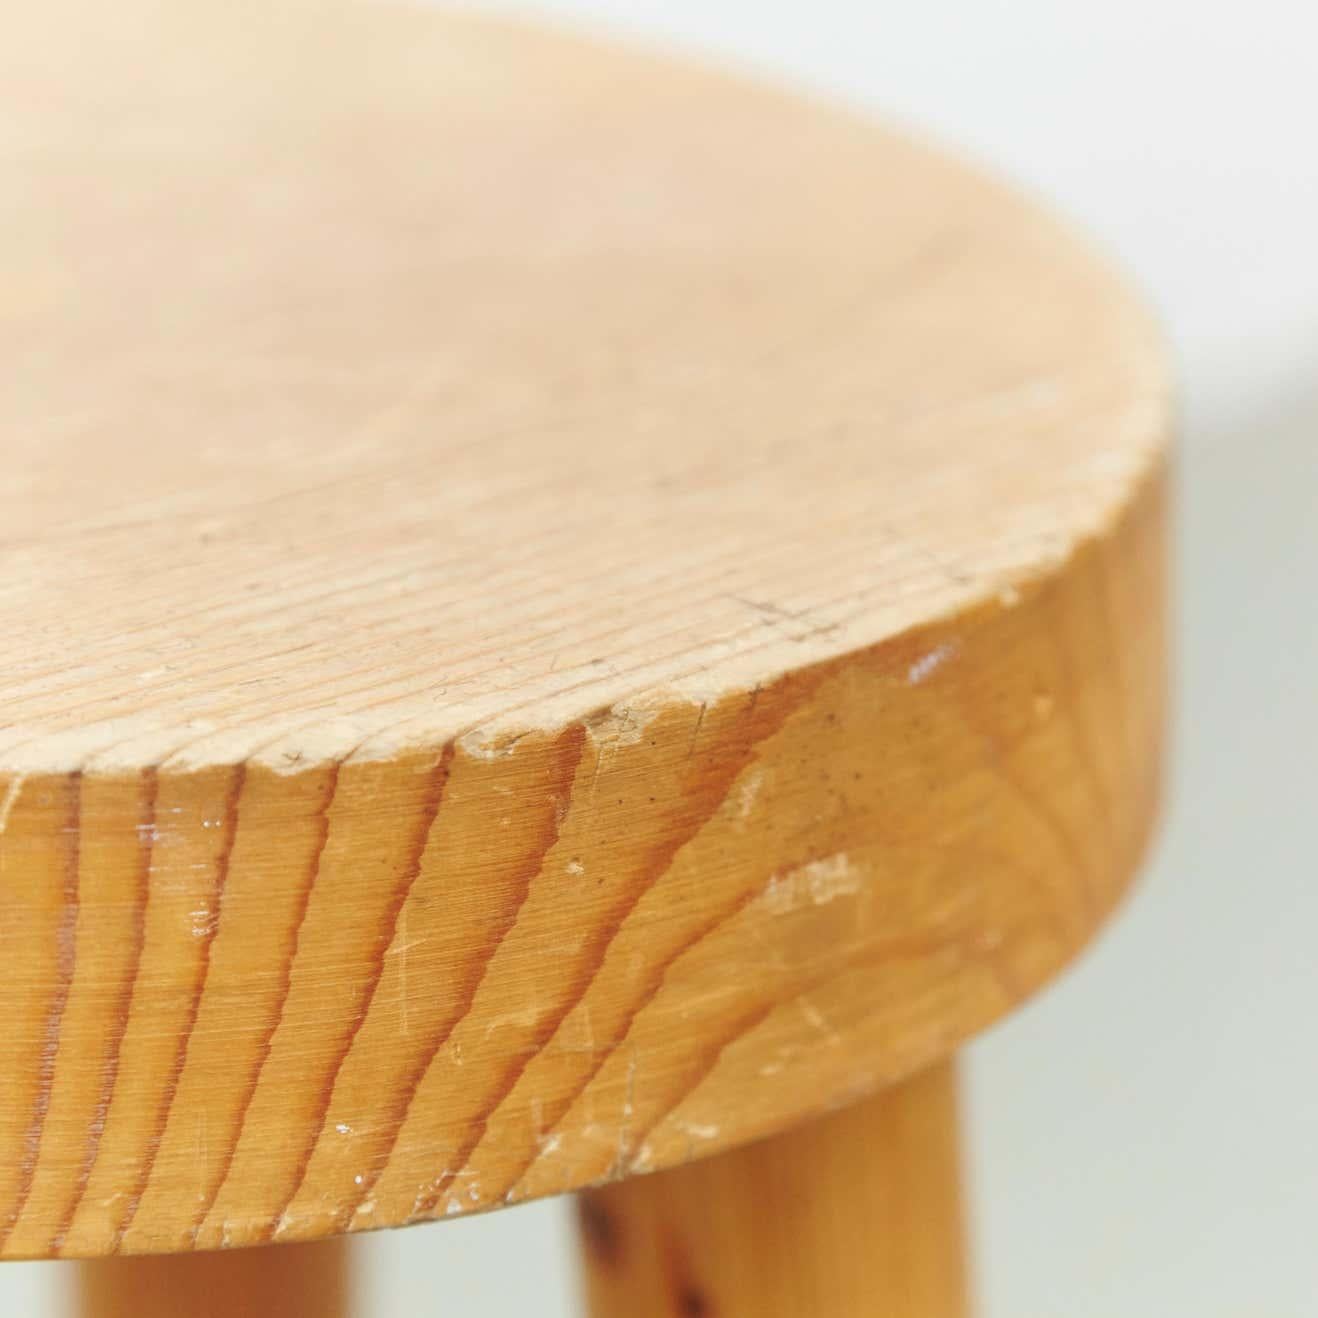 Charlotte Perriand Wood Stool for Les Arcs, circa 1960 For Sale 2